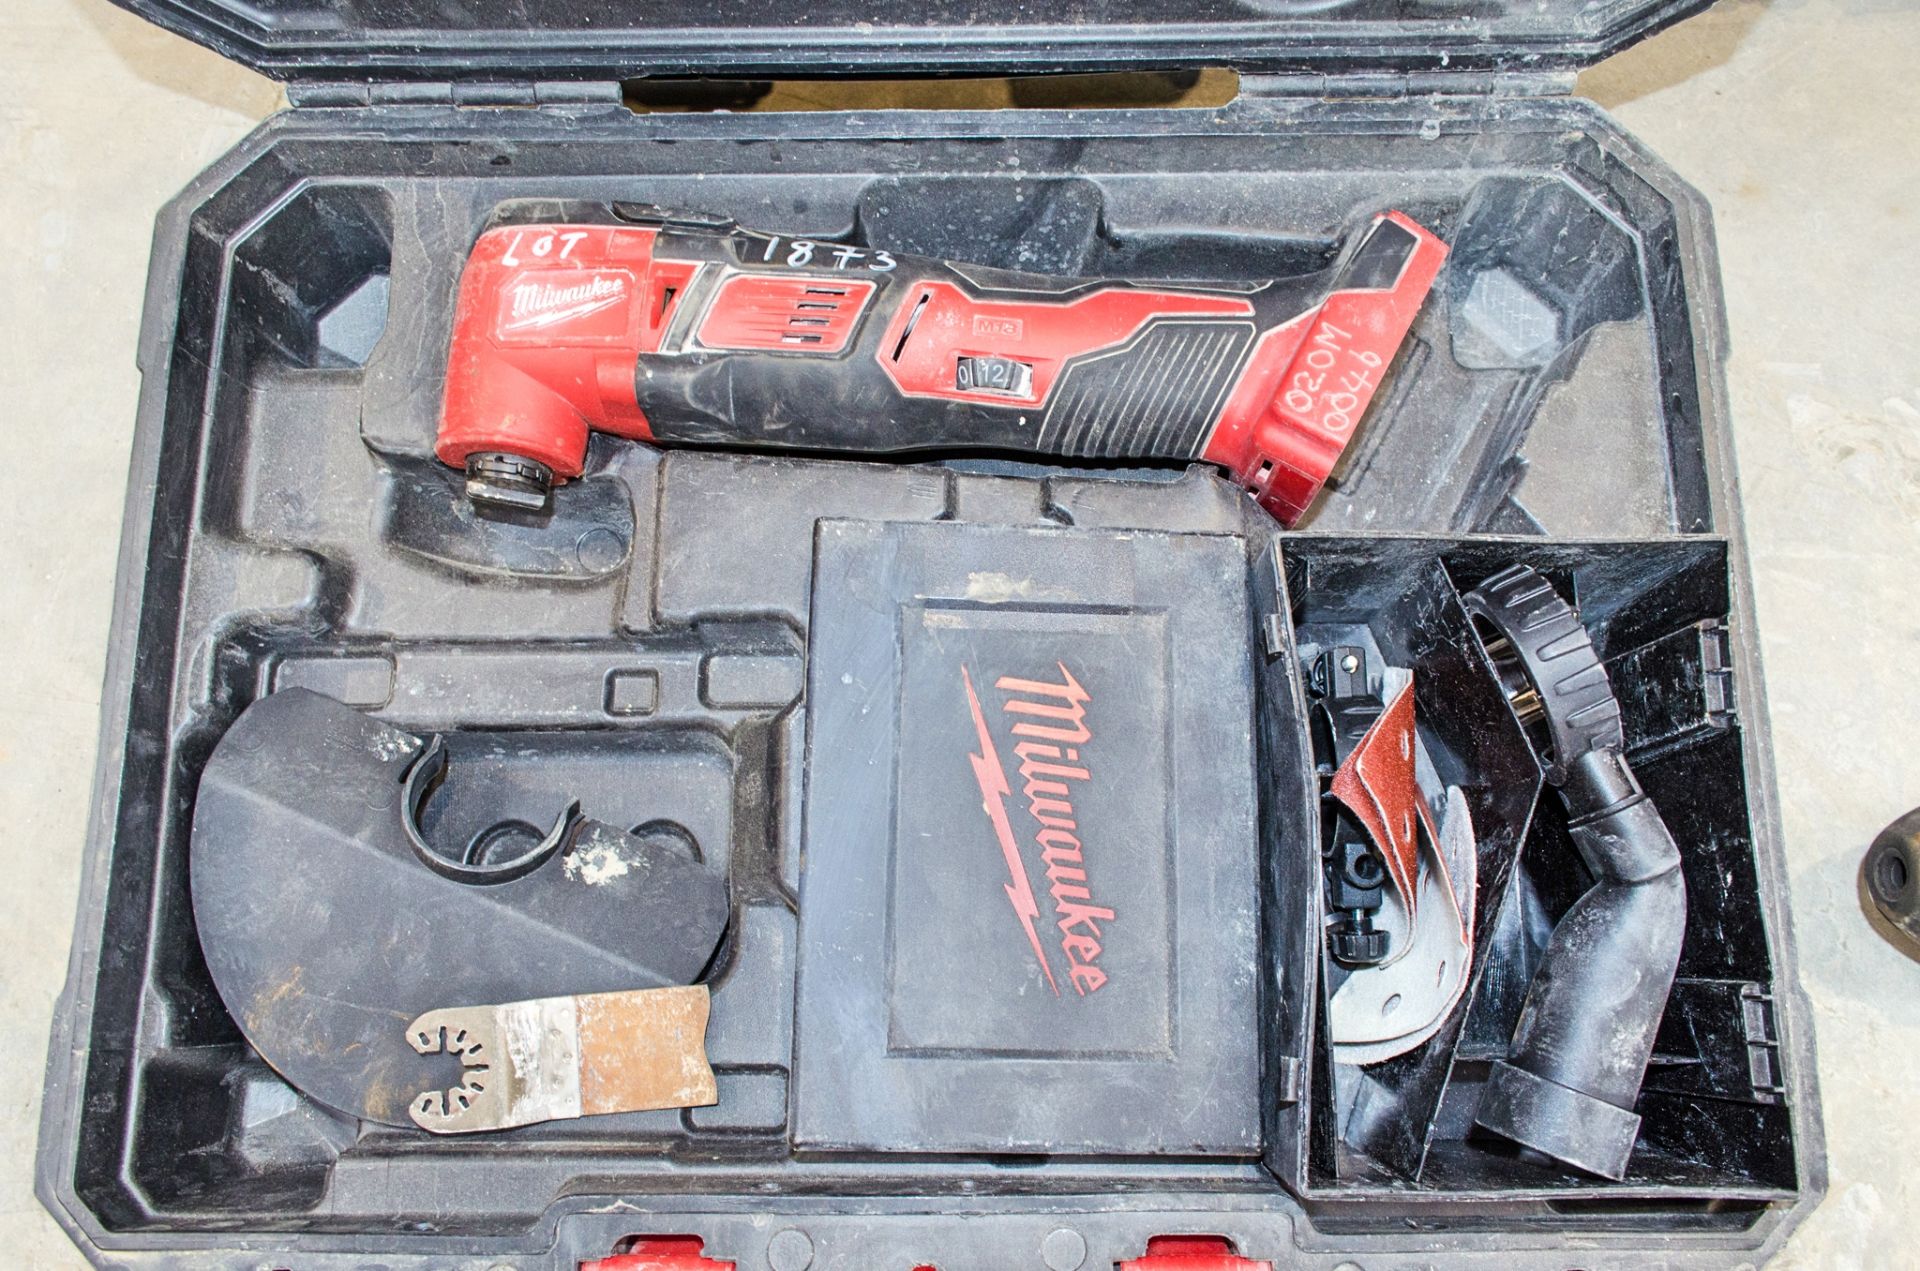 Milwaukee M18 BMT 18v cordless multitool c/w carry case ** No battery or charger **